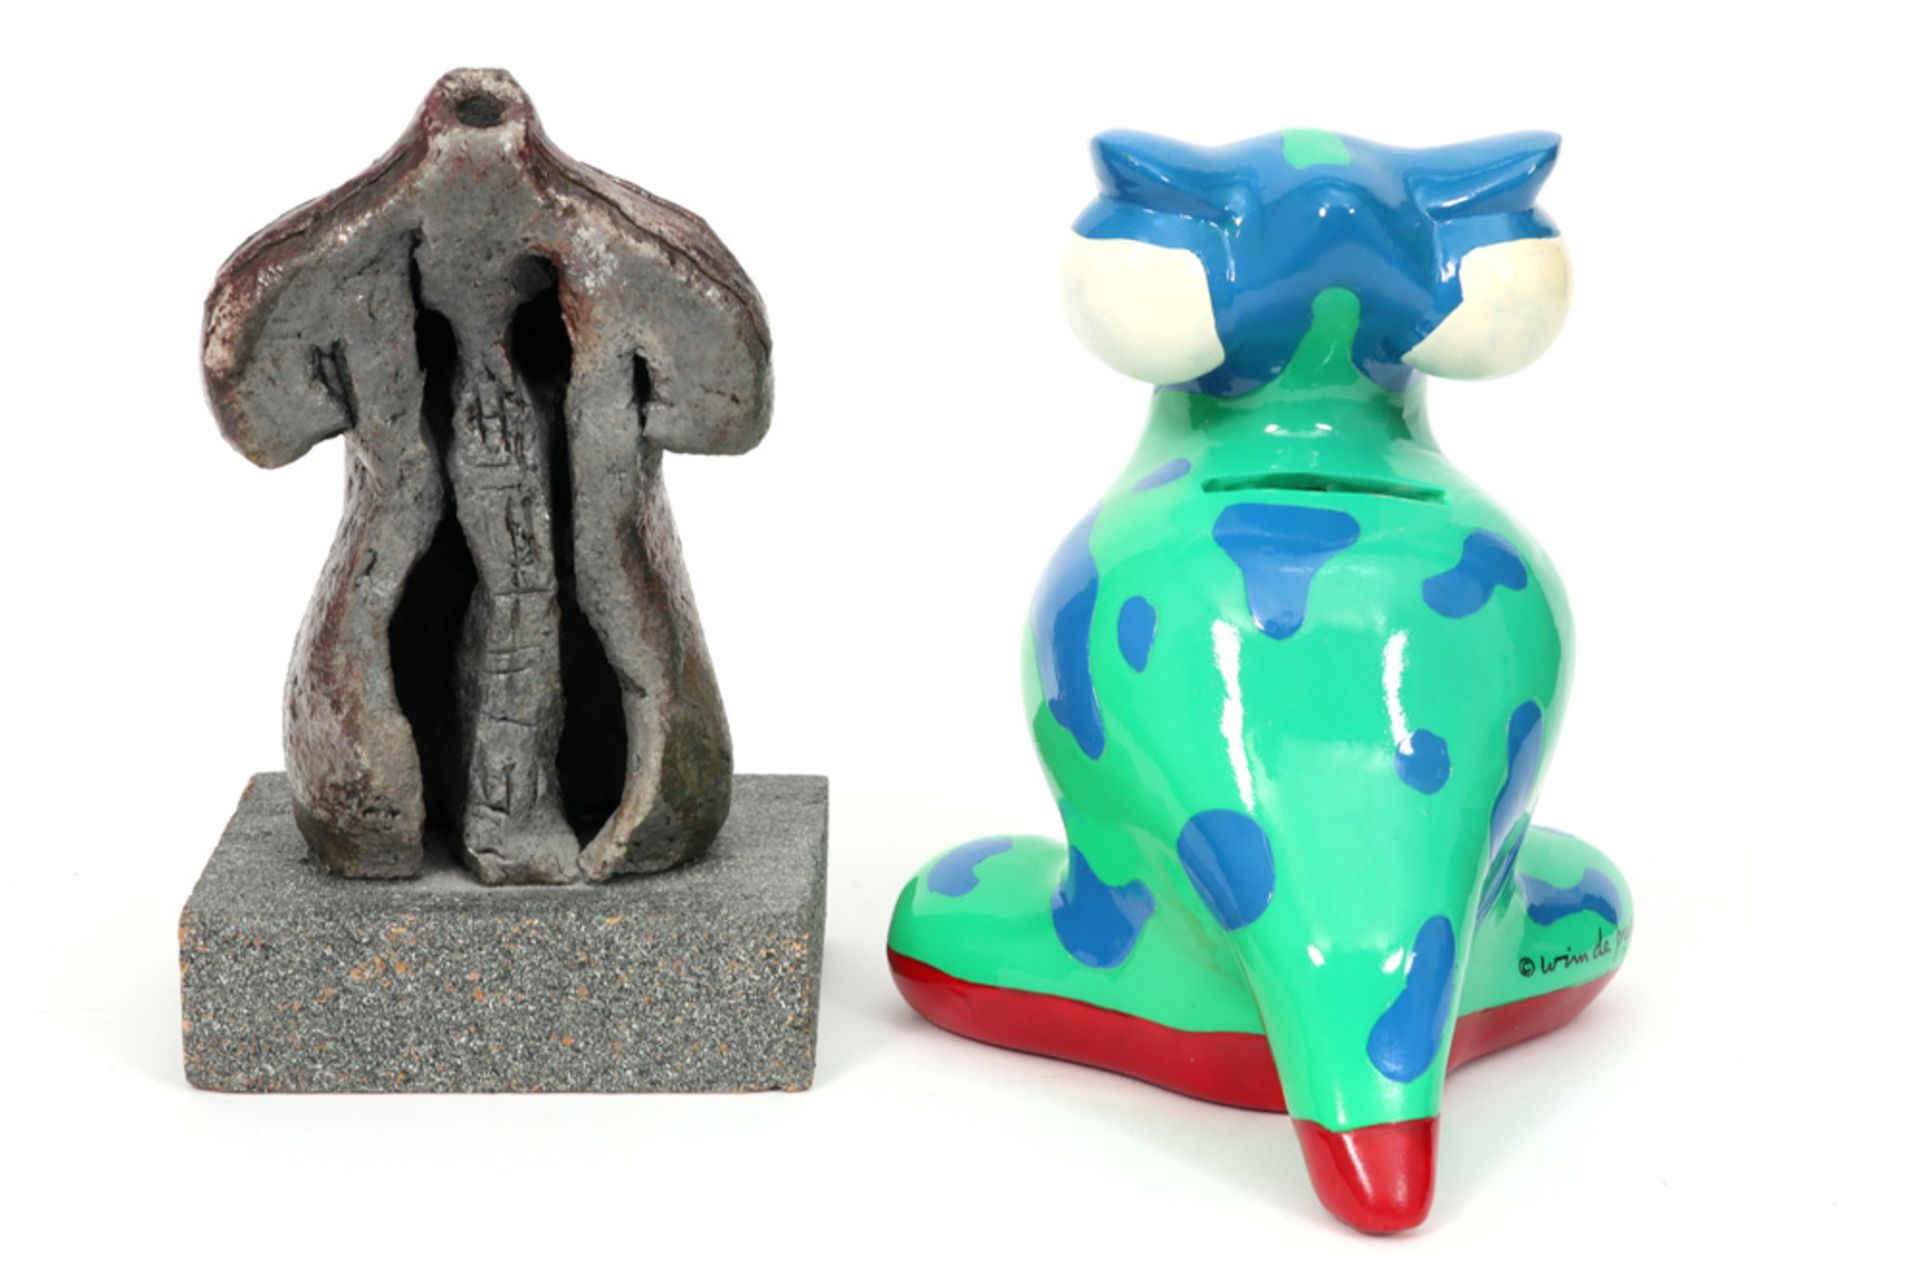 illegibly signed sculpture in terracotta and a Belgian resin sculpture/piggy bank signed Wim de Prez - Image 2 of 3